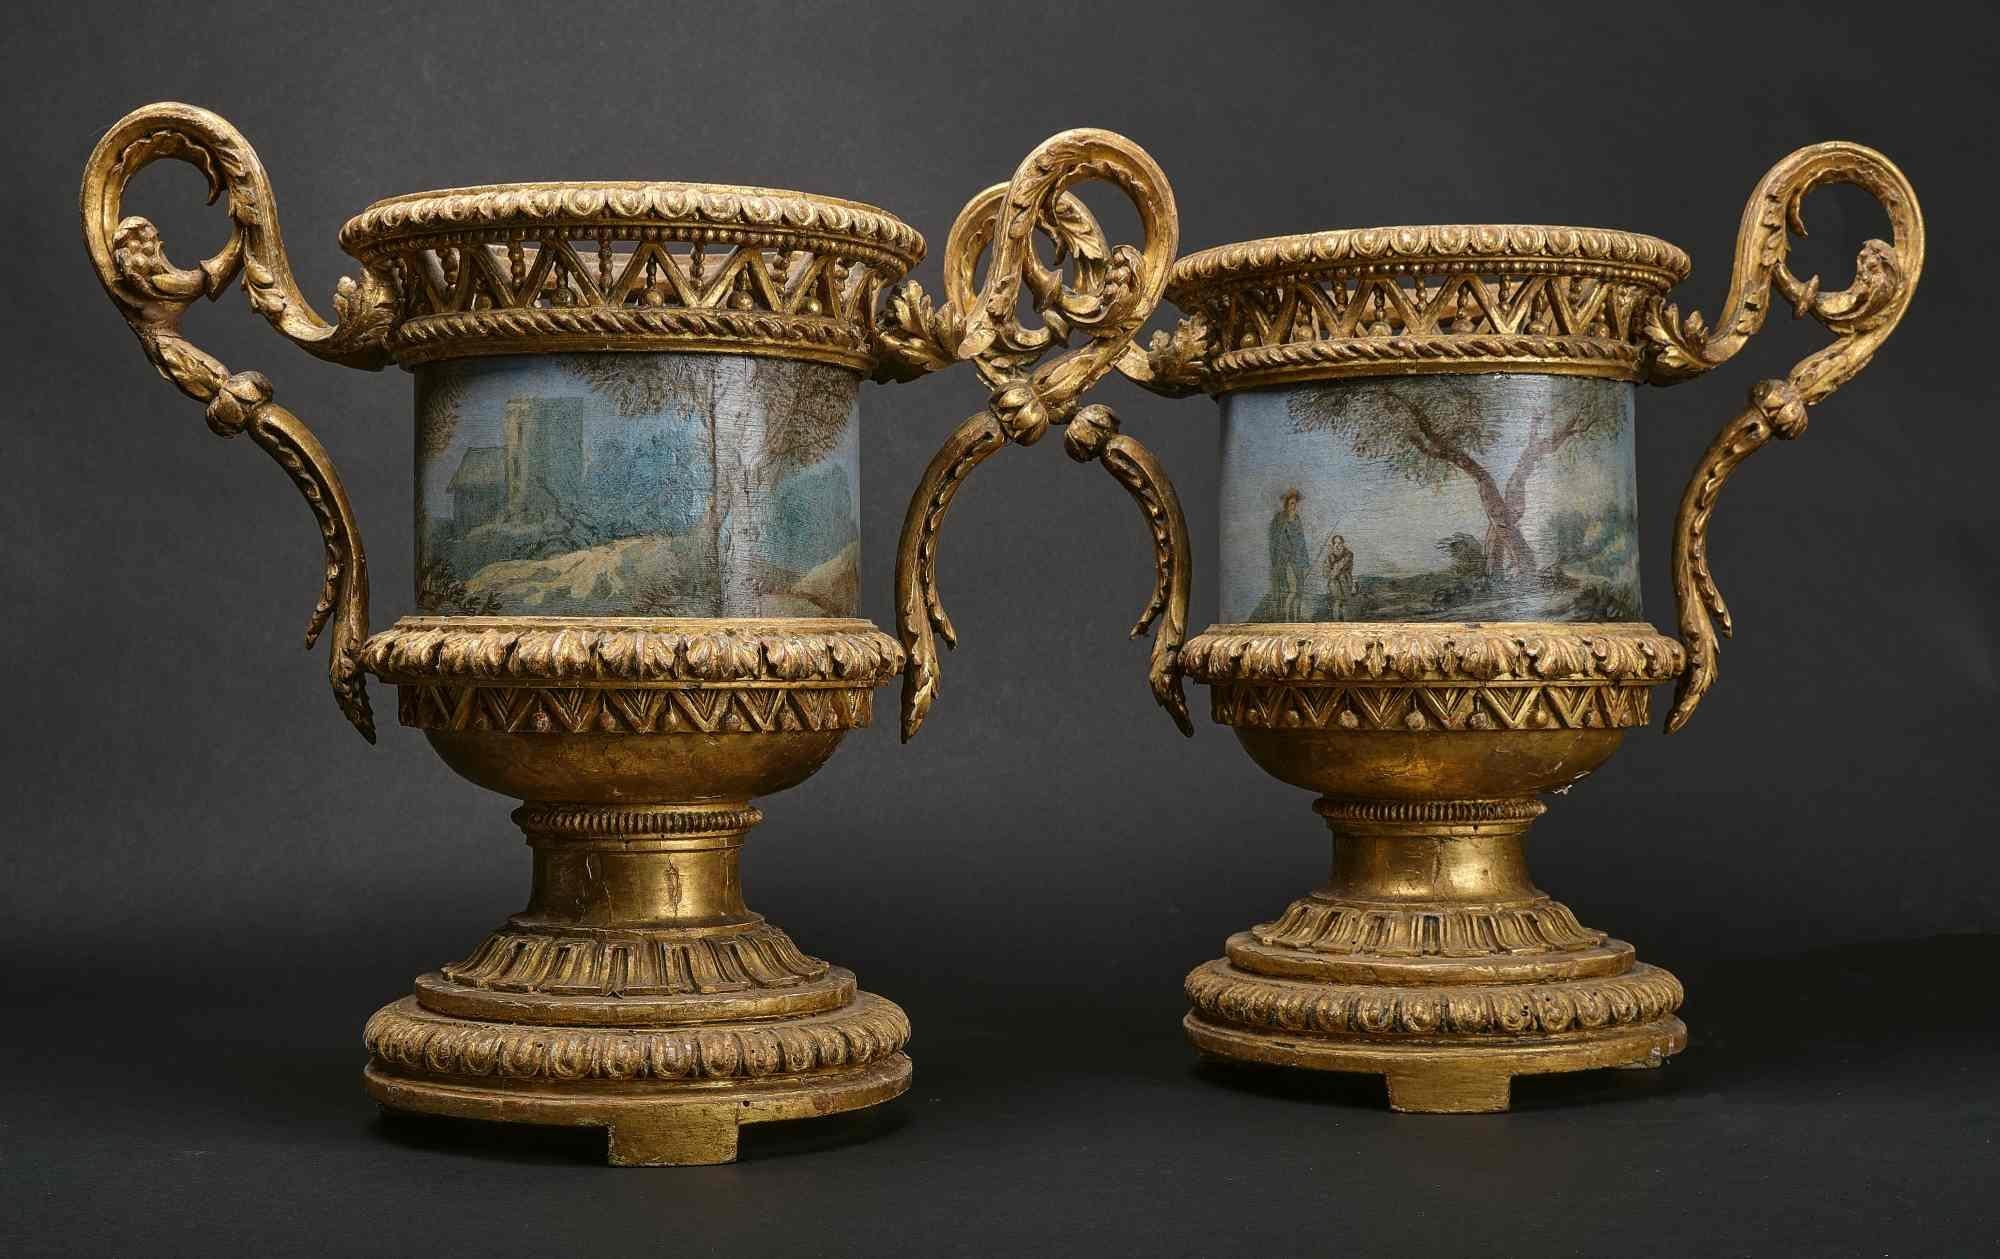 This pair of Roman vases of the Louis-XVI period is extremely rare. The virtuosity of the sculpture follows with all the elements the Louis XVI style. The gilding is never touched. The painted sheet metal flowerpots are decorated with ideal